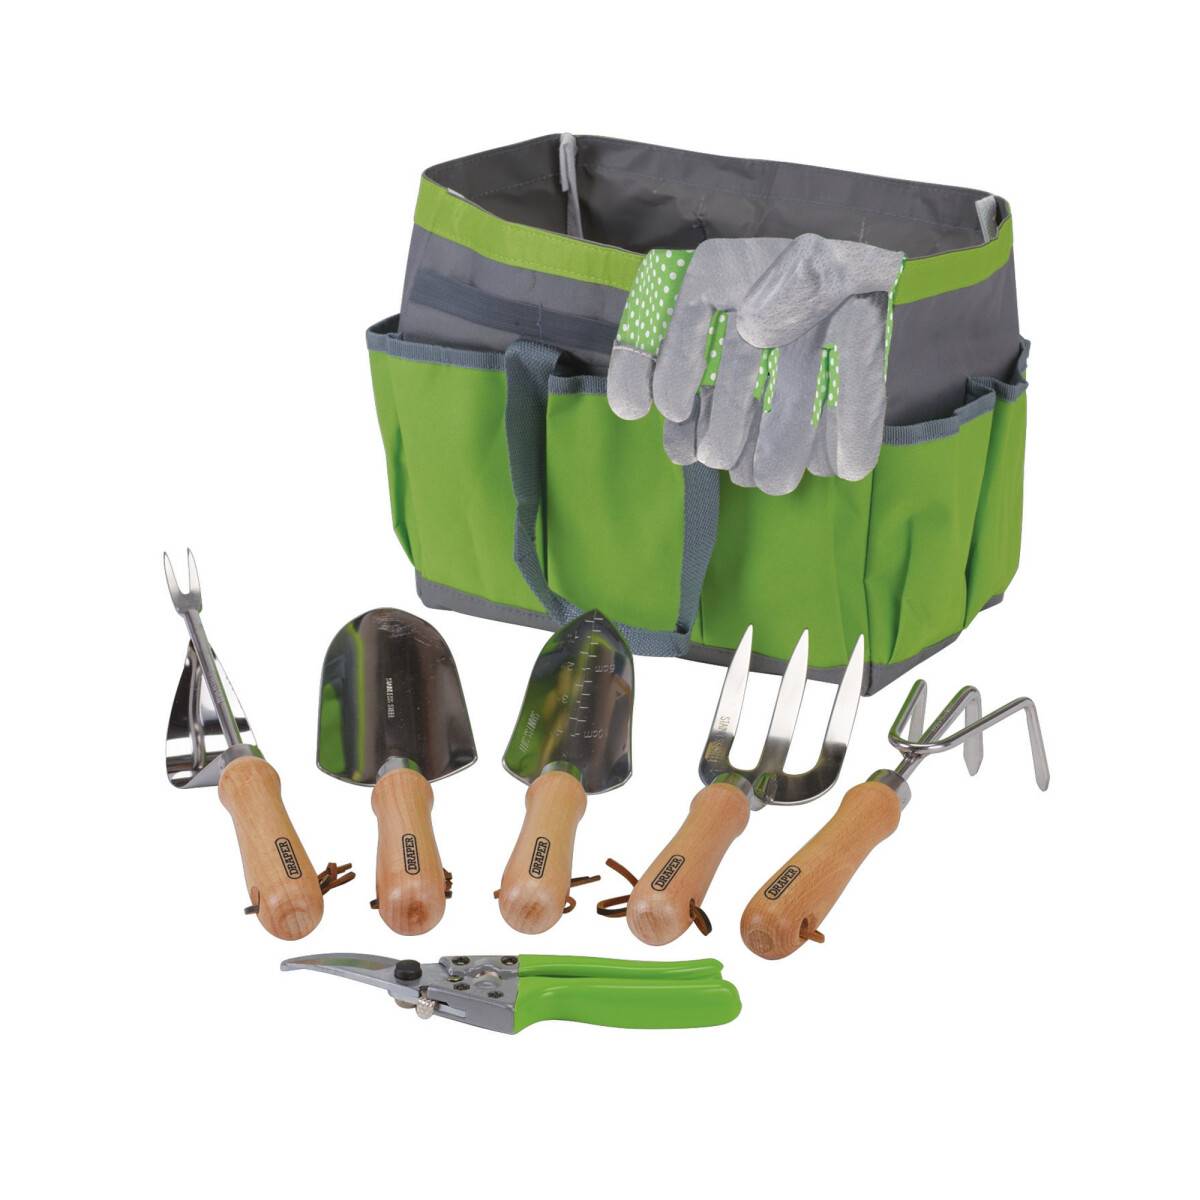 Stainless Steel Garden Tool Set with Storage Bag